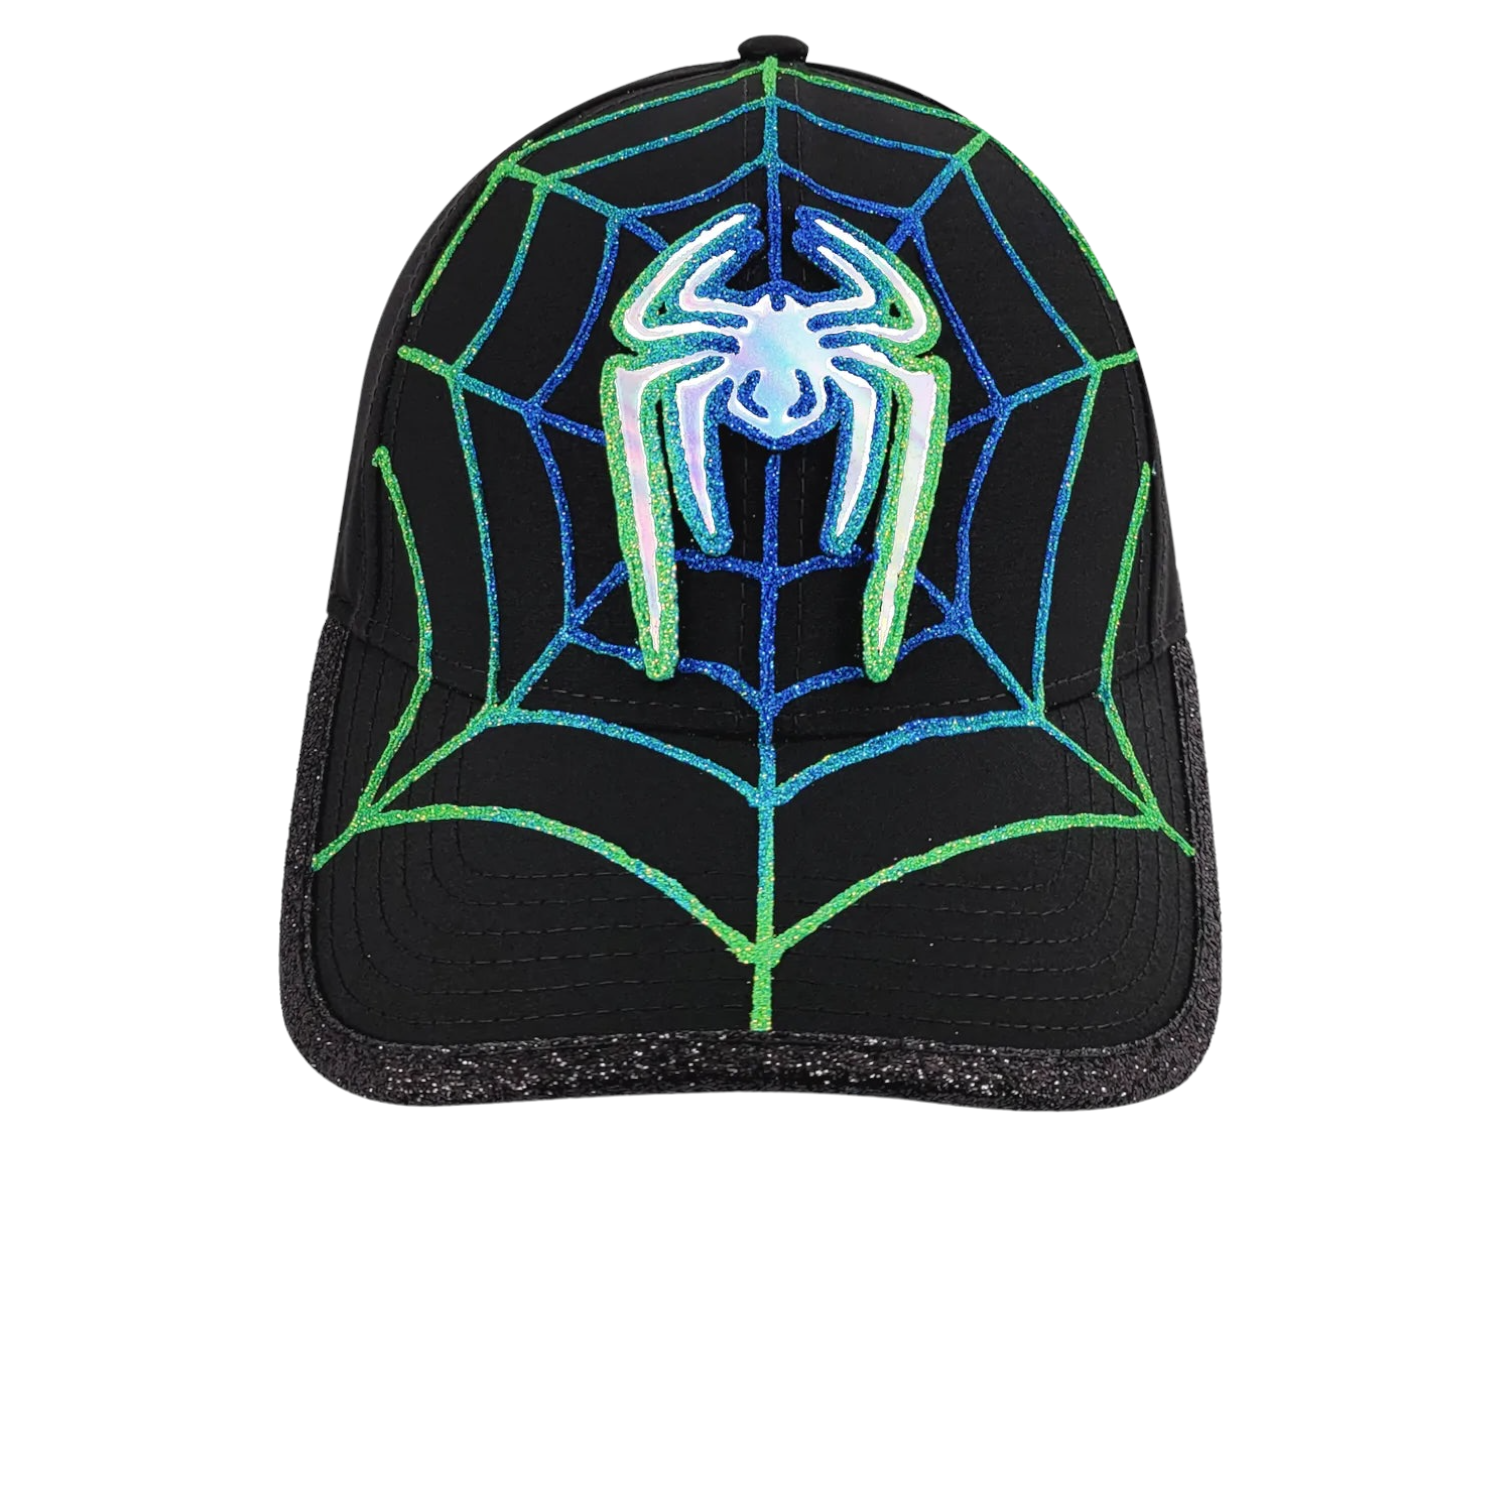 Casquette Spider Iridescent Greenblue deluxe - Stayin